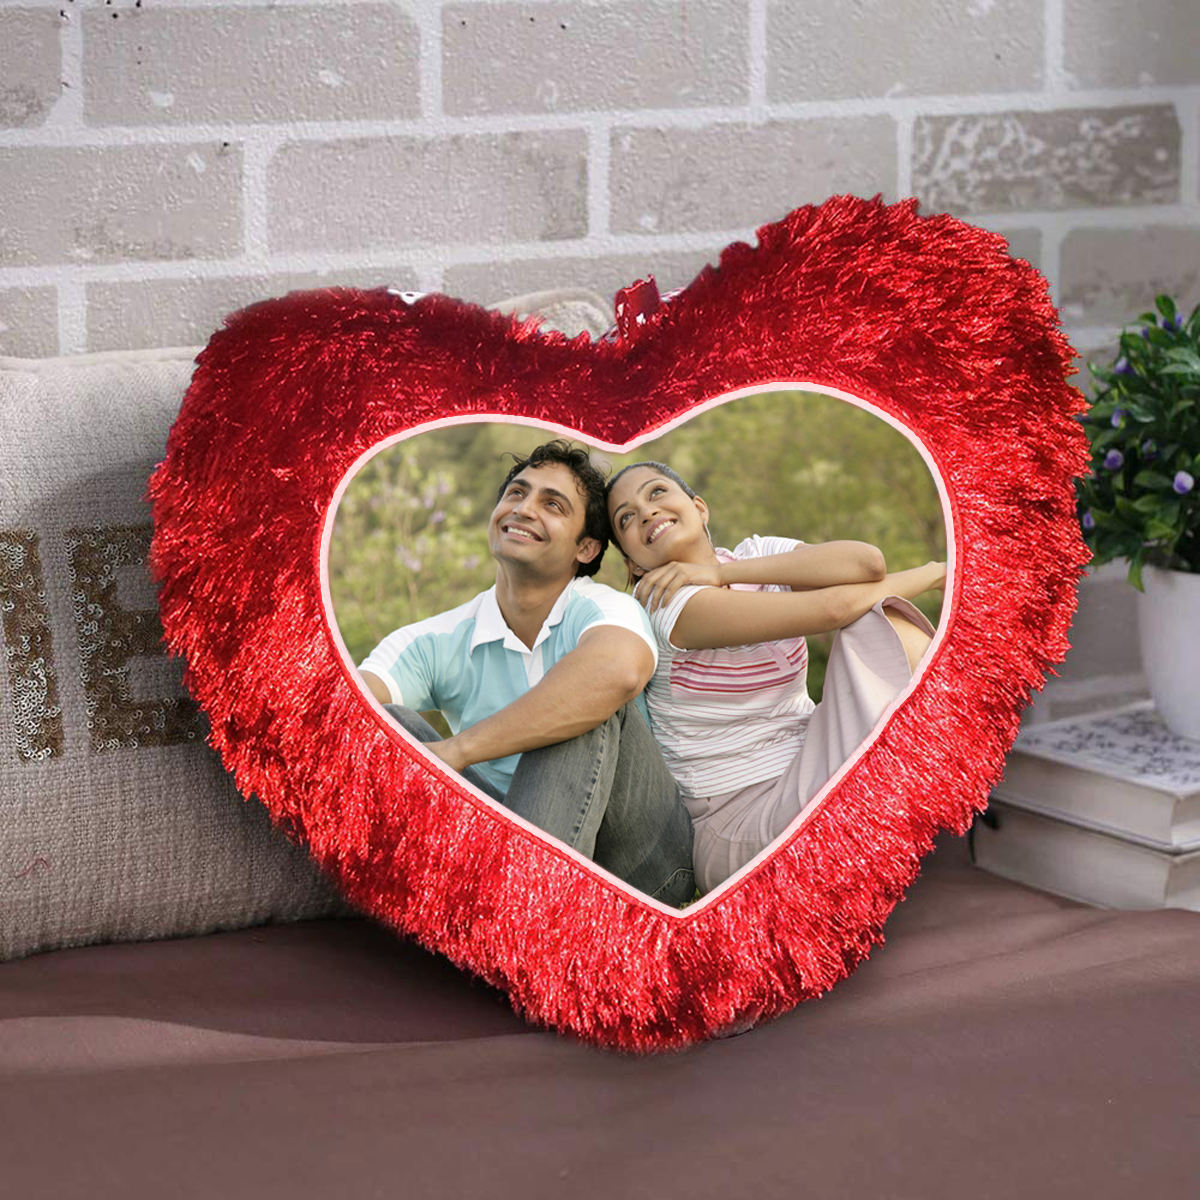 Valentines gifts for her, Buy personalised heart shaped cushion | Buy custom photo heart pillow online